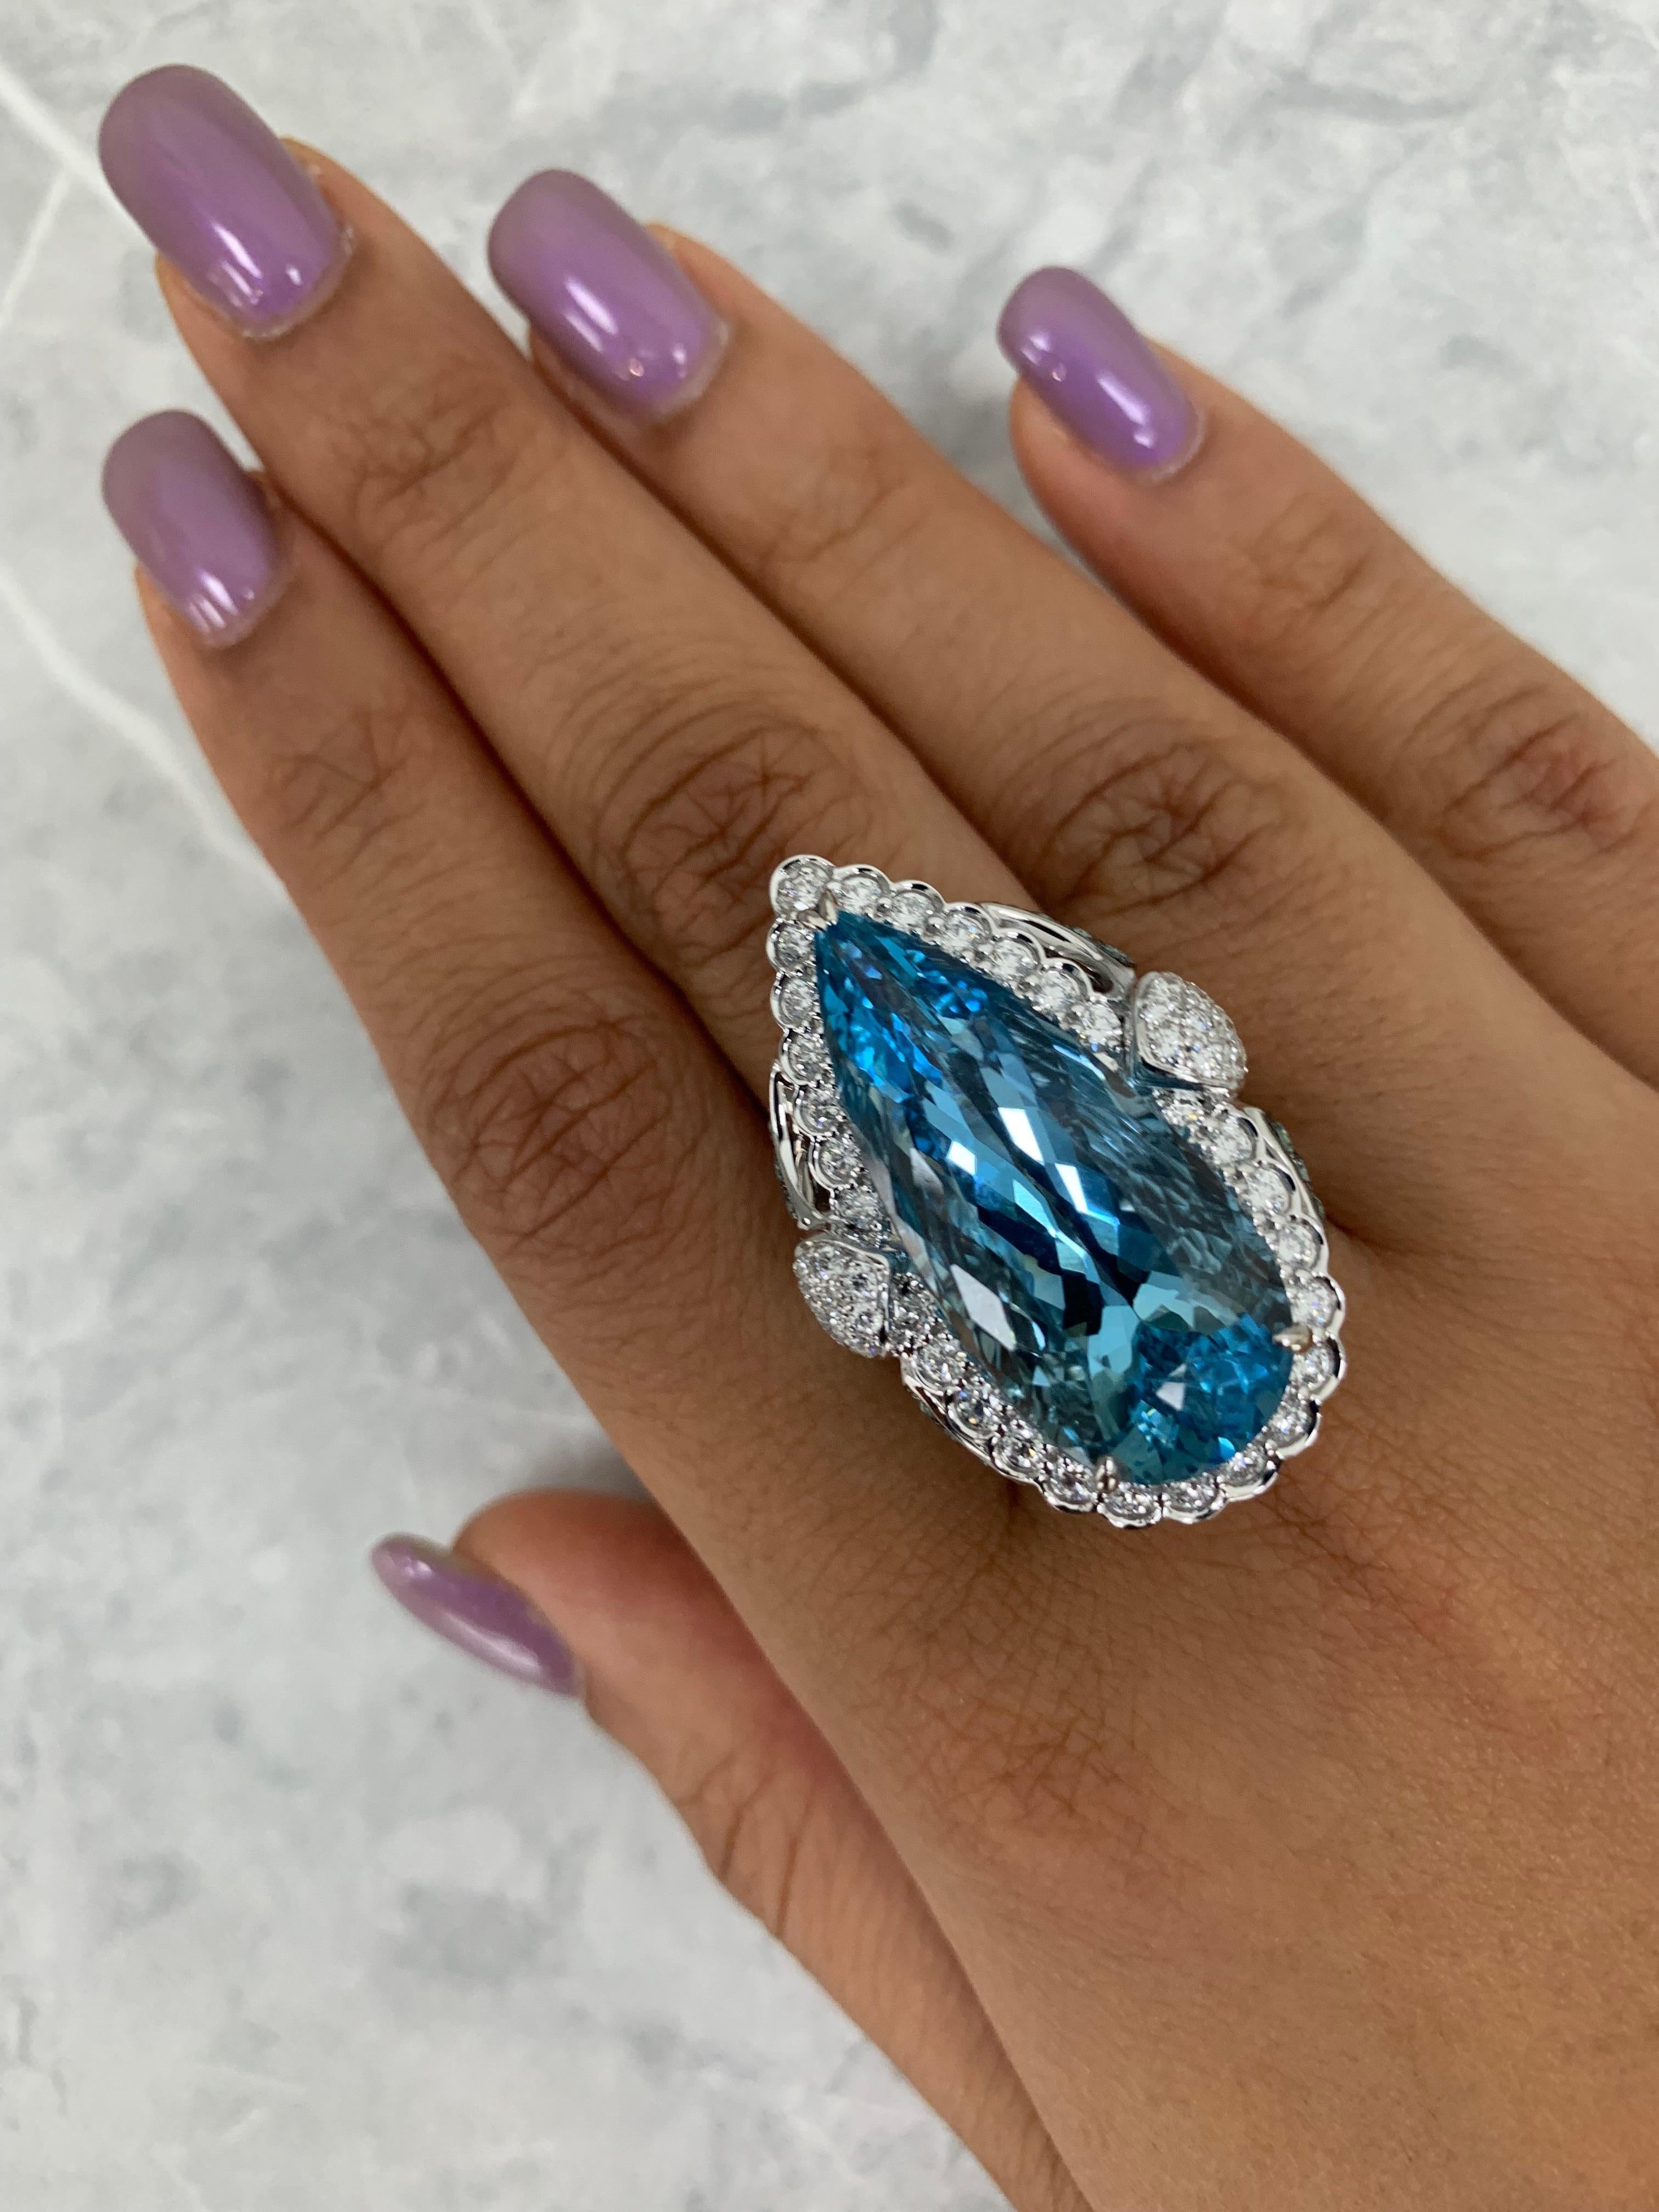 This collection is named as “Blue Planet” to represent Earth’s marine realm. The grandiose Santa Maria Aquamarines represent the vast oceans of our planet. They are accented with subtle Paraibas and Alexandrites to support the center stone just how